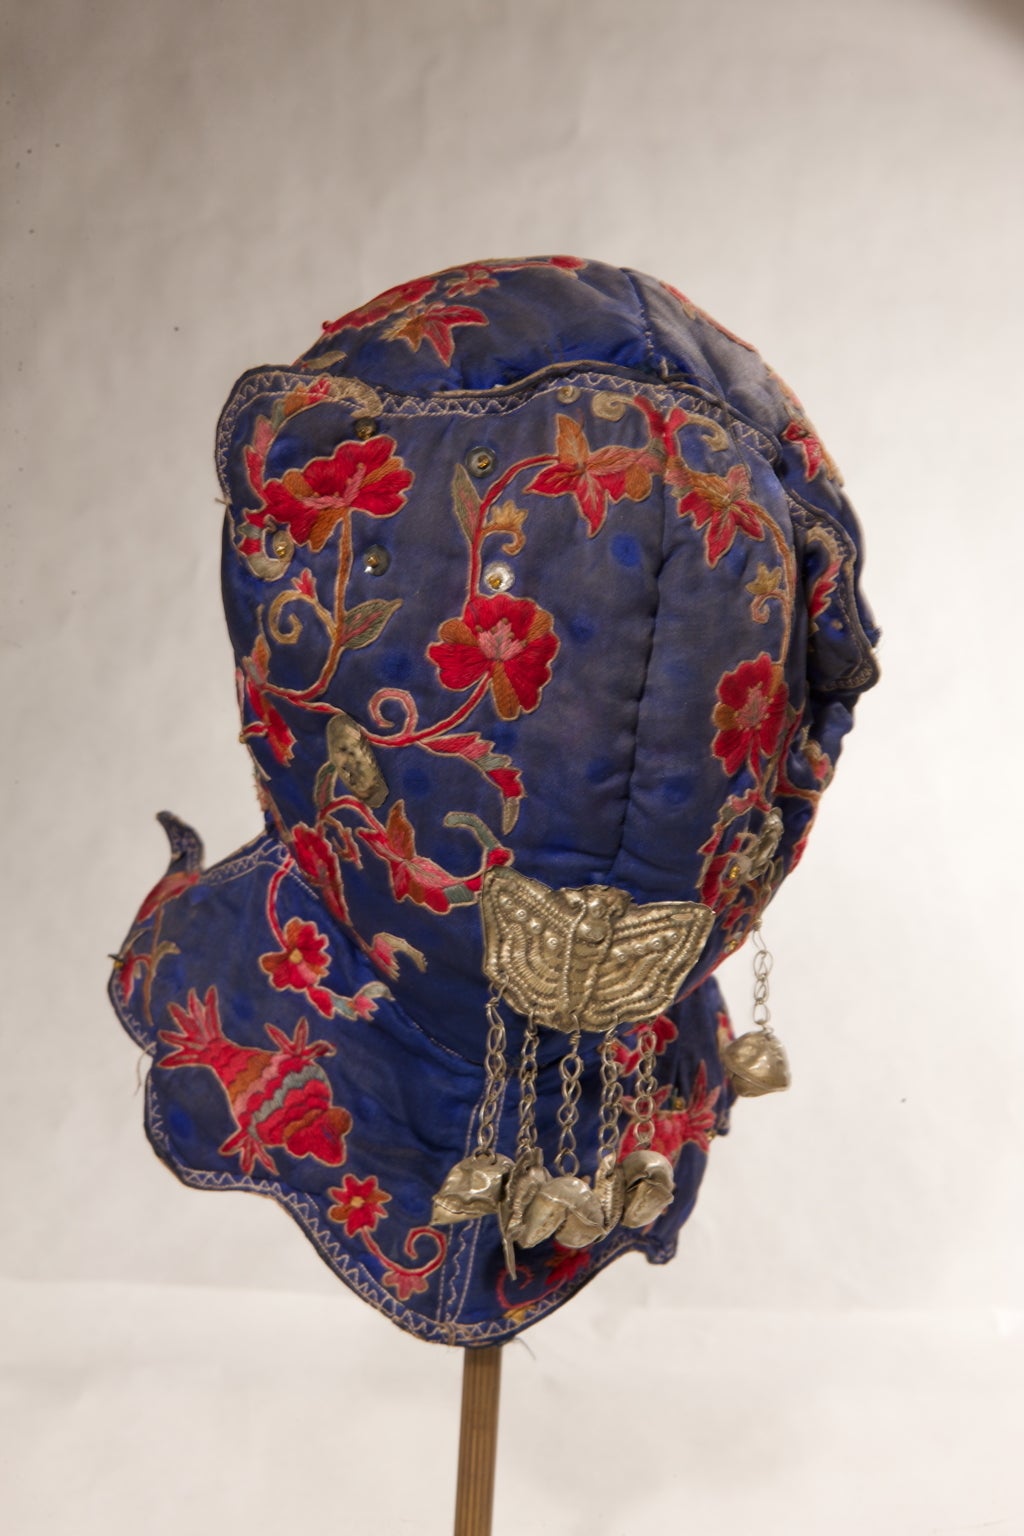 Pretty and old Chinese child bonnet, silk embroidered.
Ref. B/2184 -
Internal stained , but washed and cleaned.